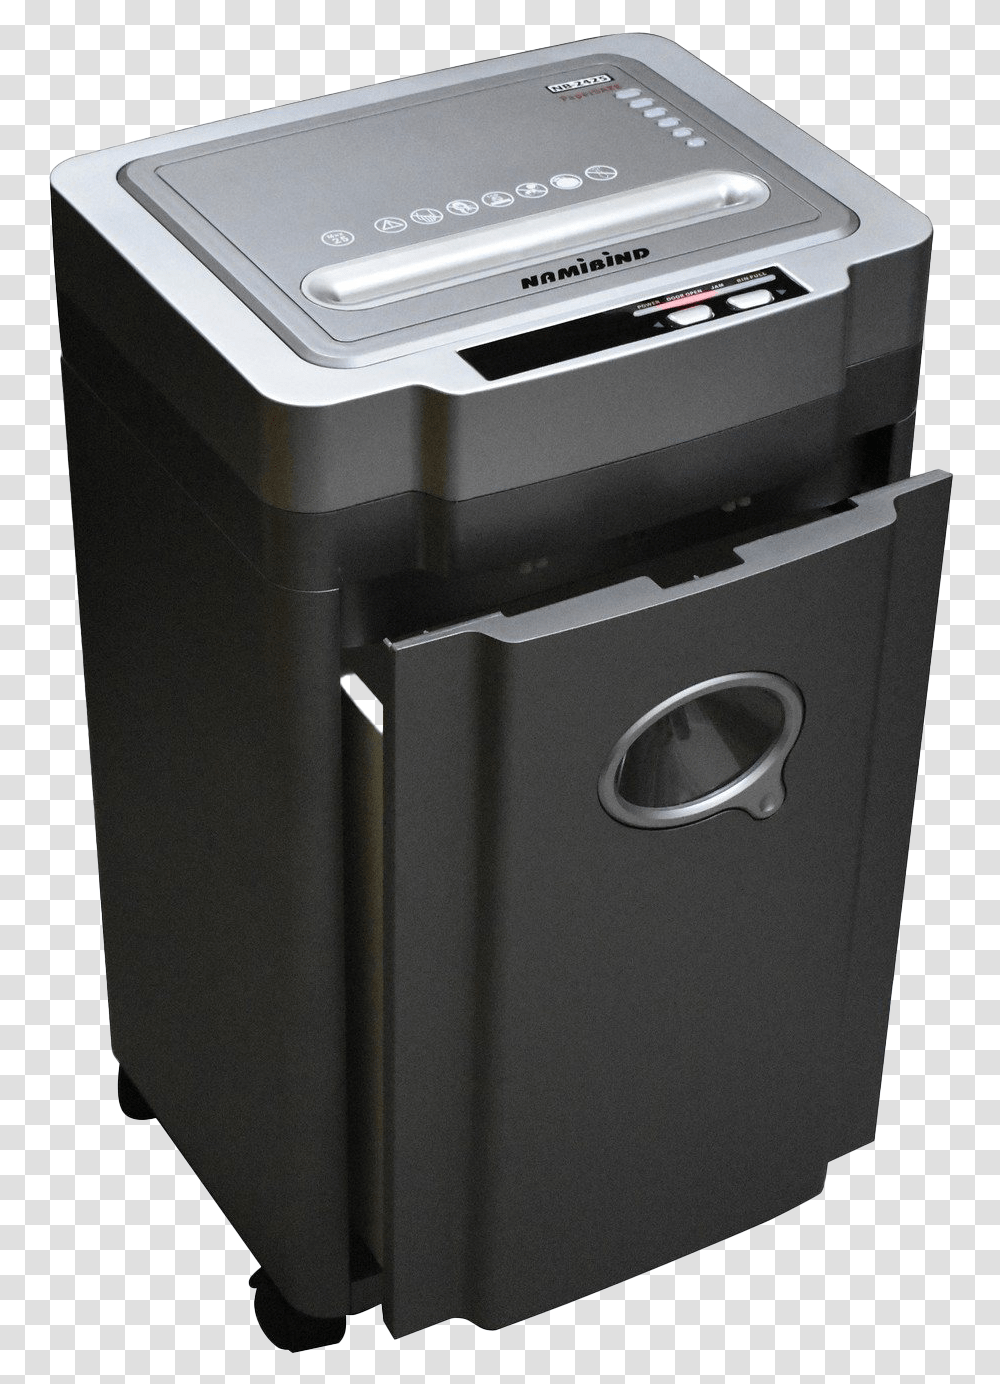 Paper Shredder Download Image Paper Shredder Machine For Office Use, Appliance, Mailbox, Letterbox, Air Conditioner Transparent Png